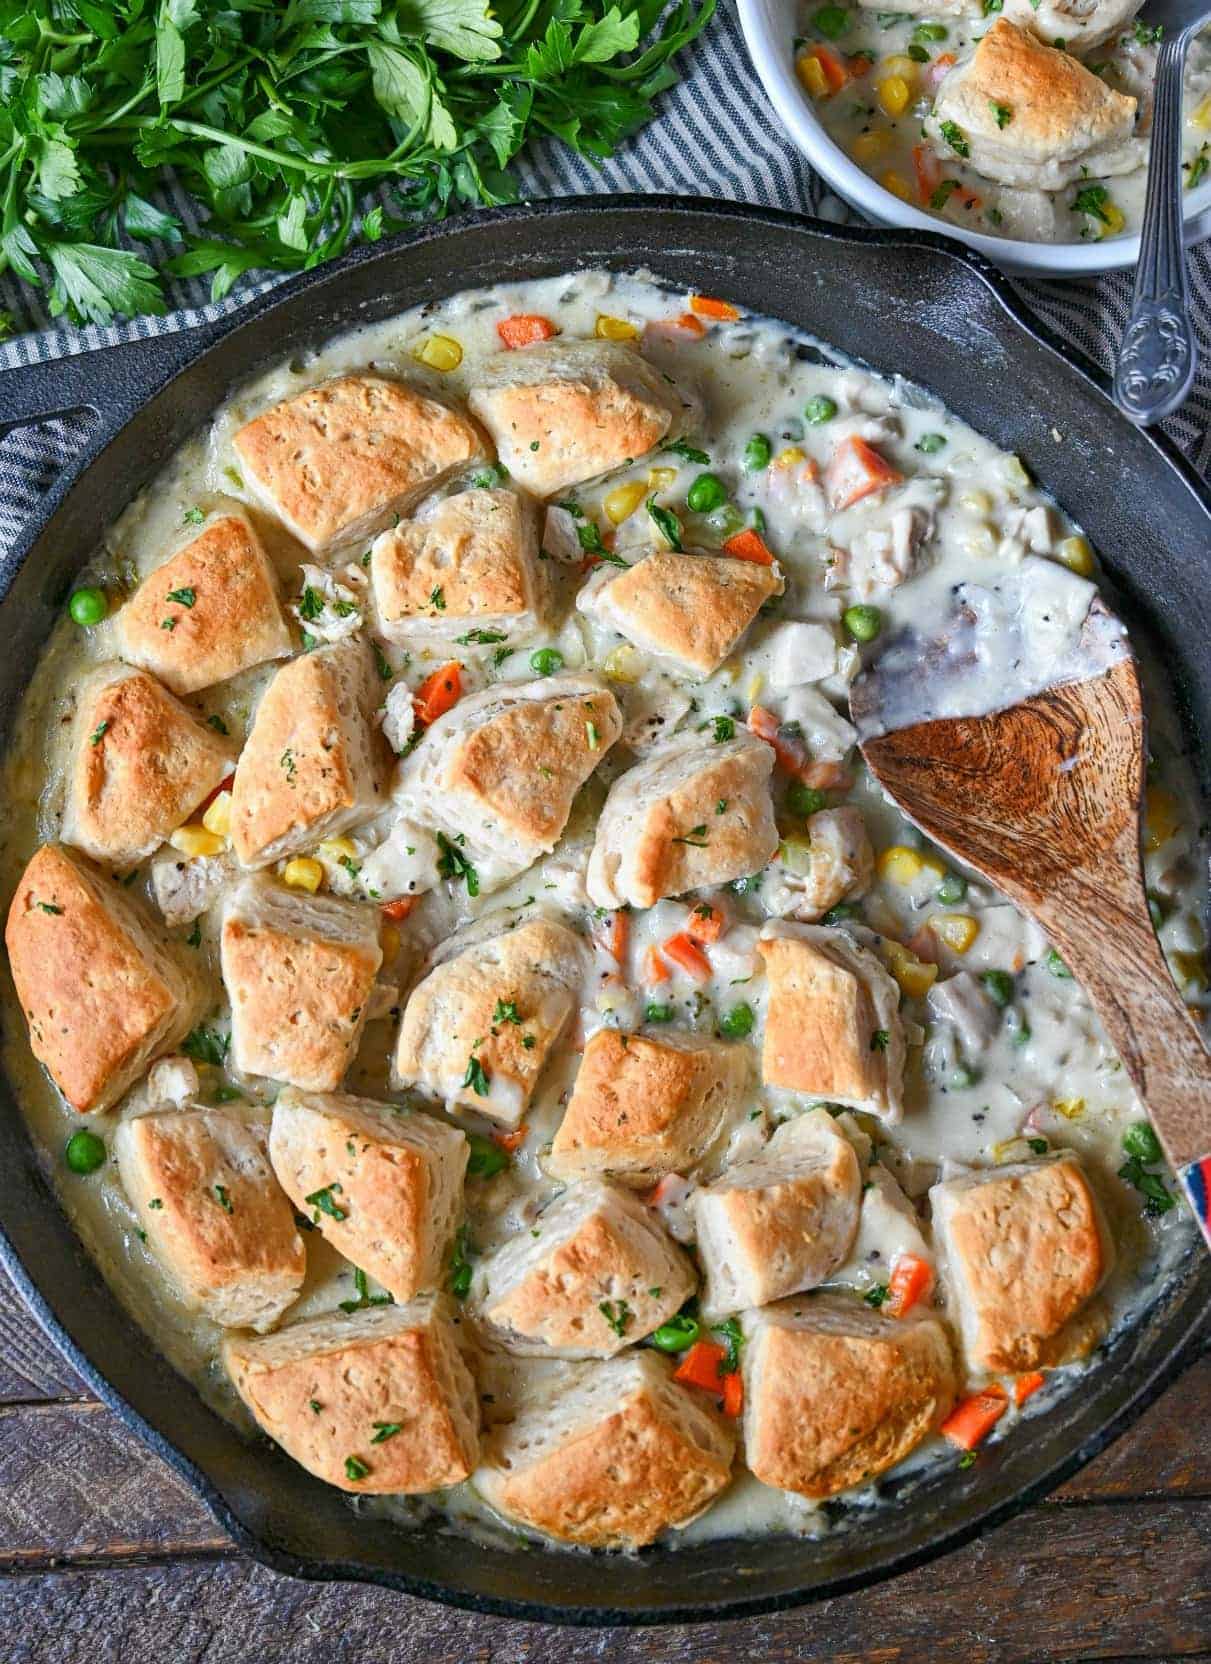 Chicken pot pie in a skillet with biscuits on top.